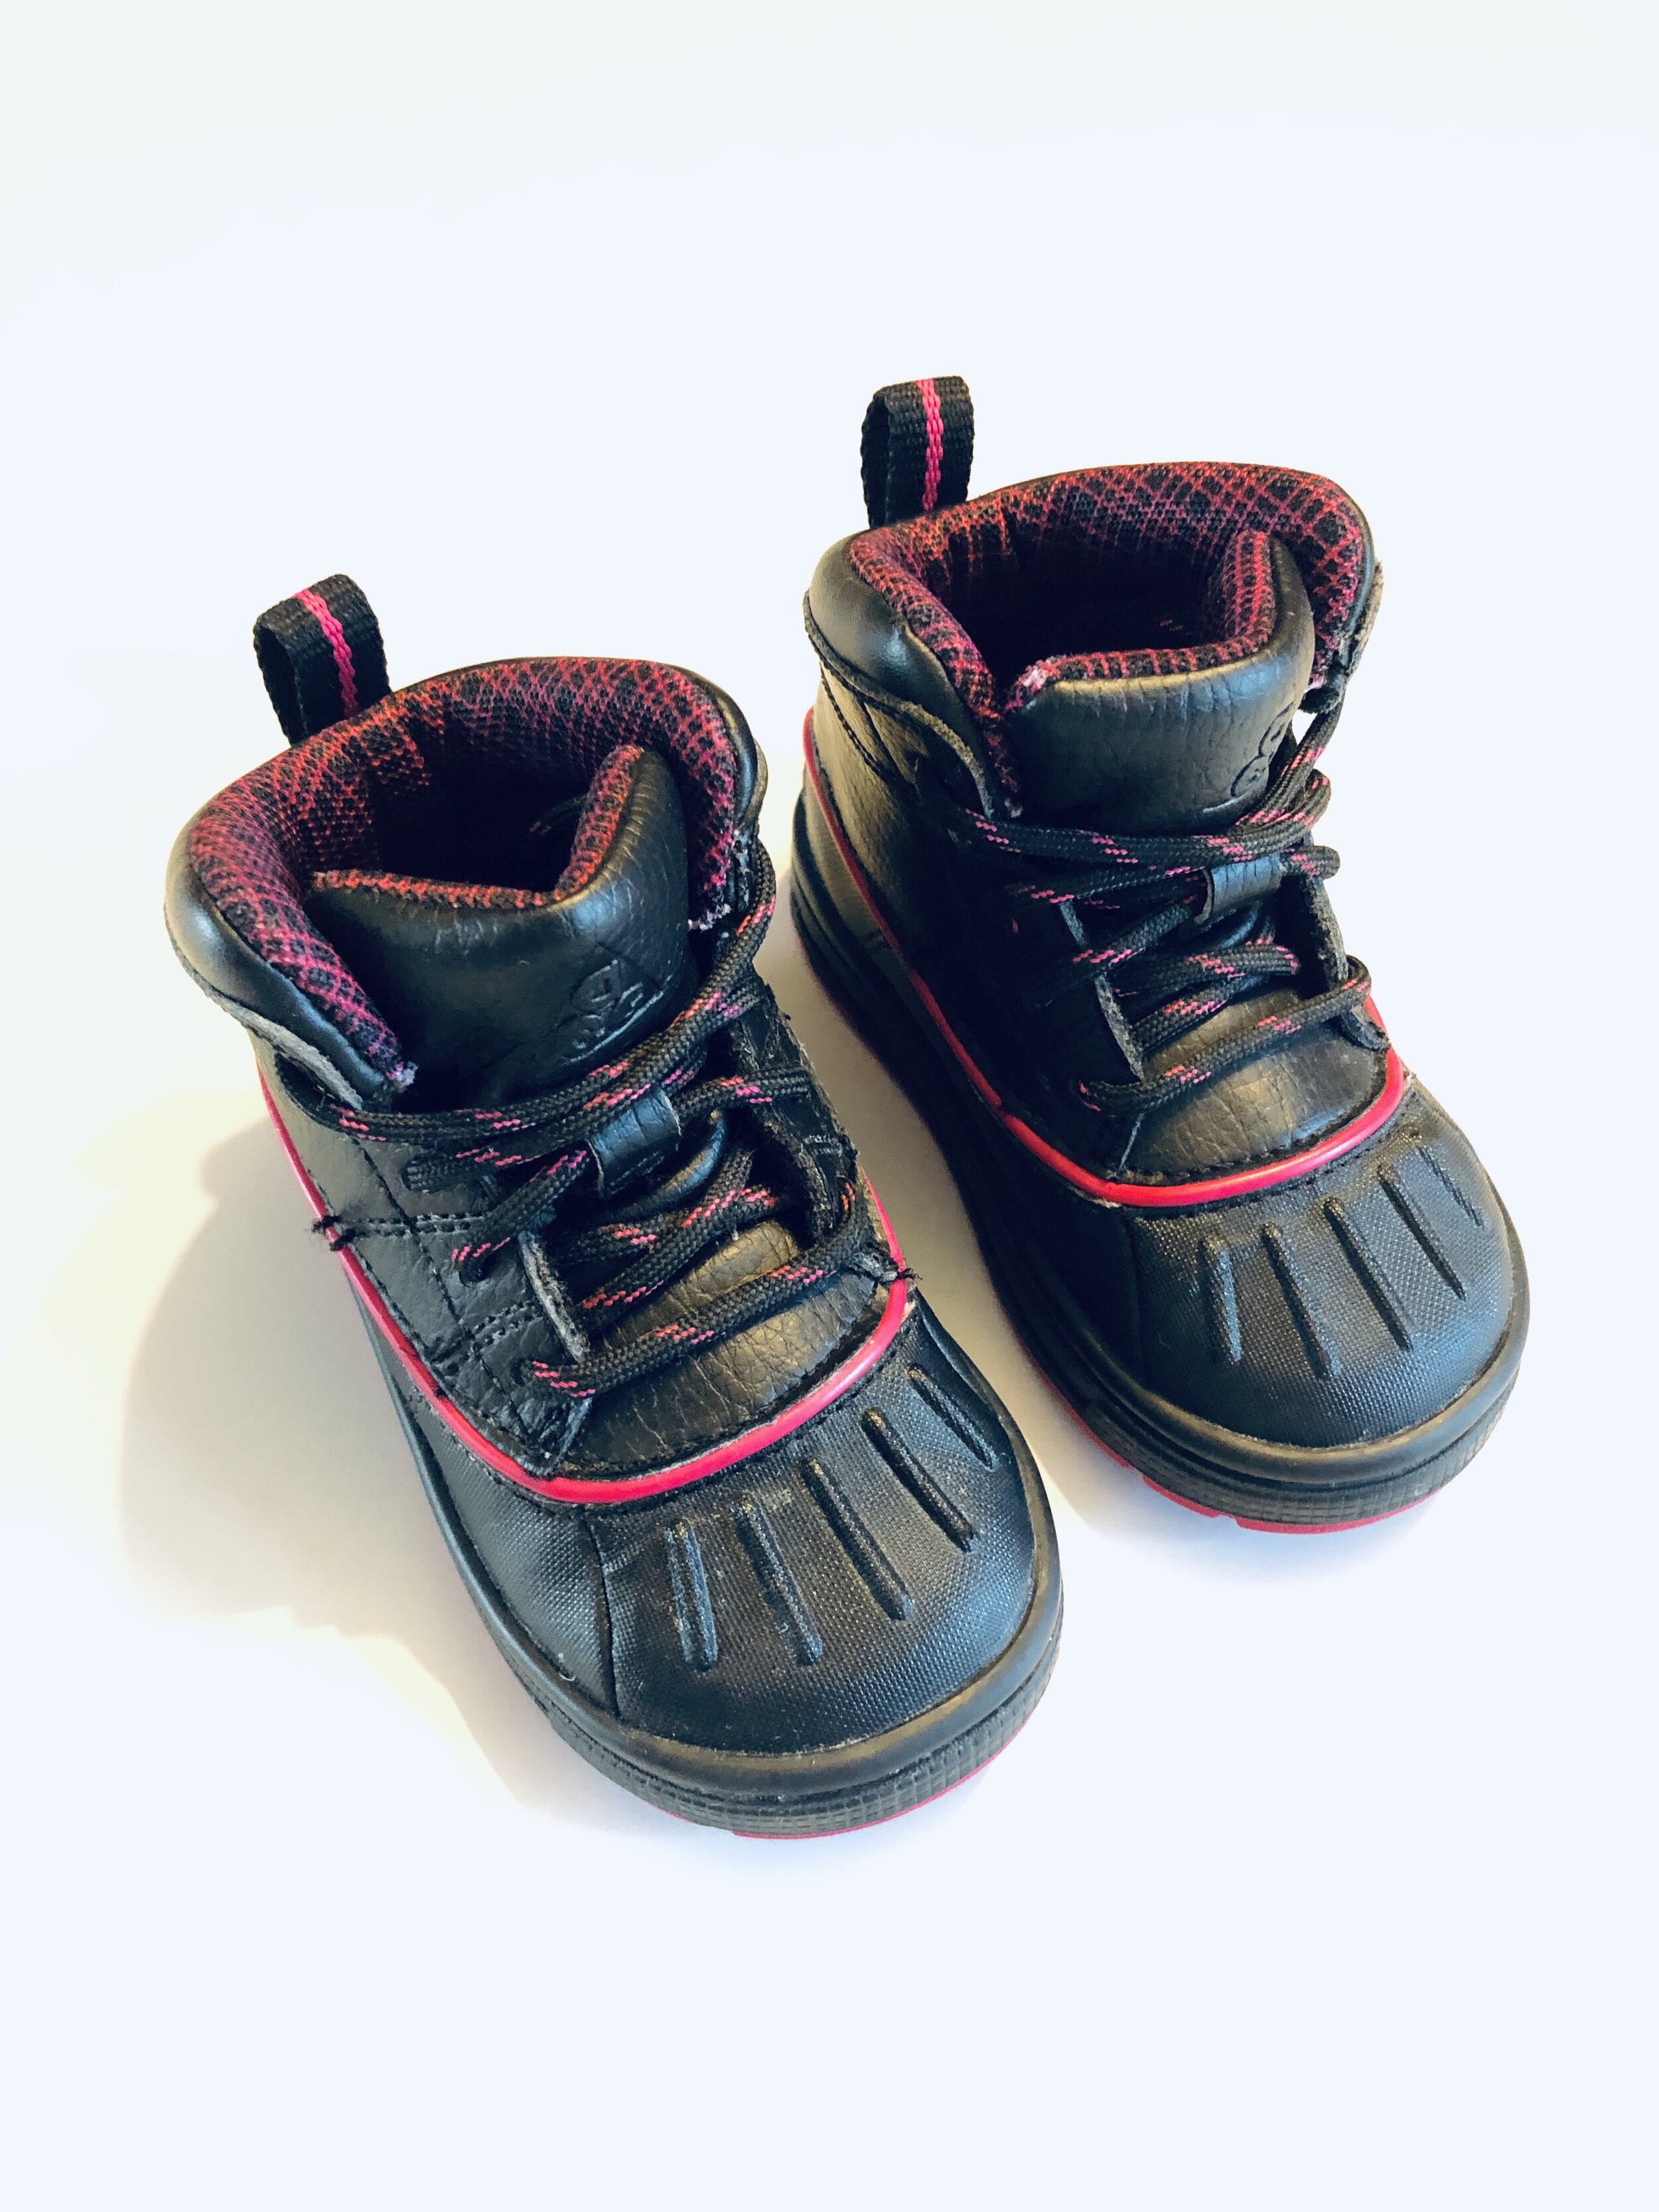 Nike ACG Woodside boots in black - size 5 (eur 21.5) — AND THEY WEAR